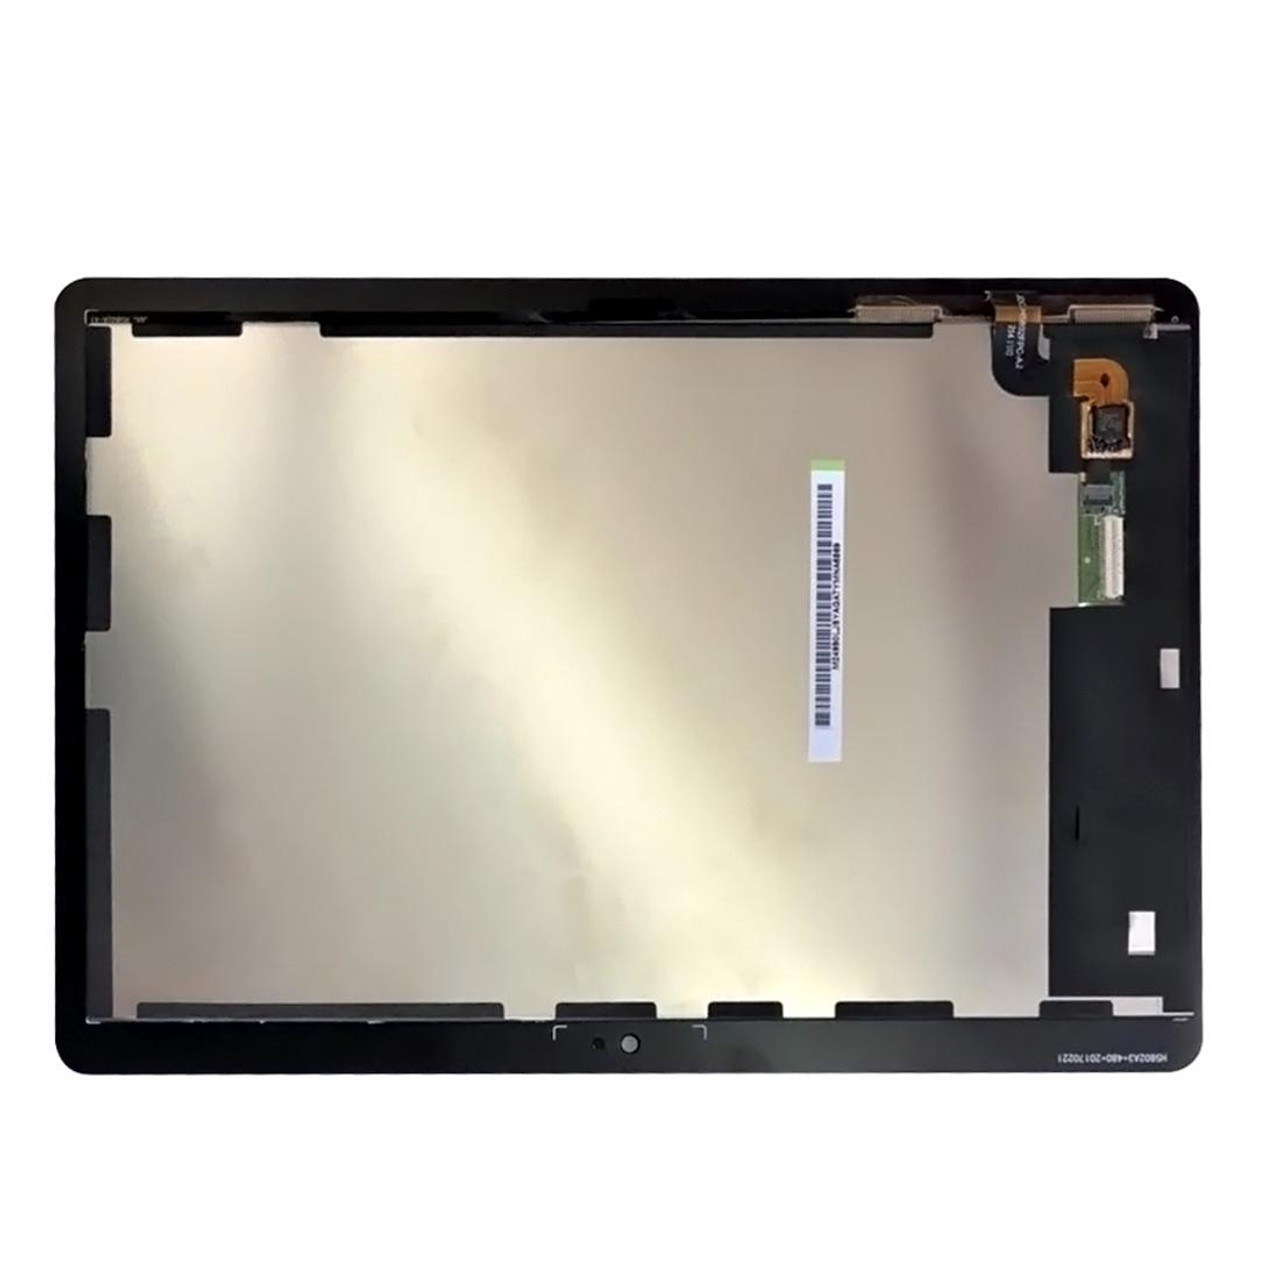 LCD For Huawei MediaPad T3 10 AGS-L03 AGS-L09 AGS-W09 T3 LCD Display Touch  Screen Digitizer Assembly + Frame For Mediapad T3 10